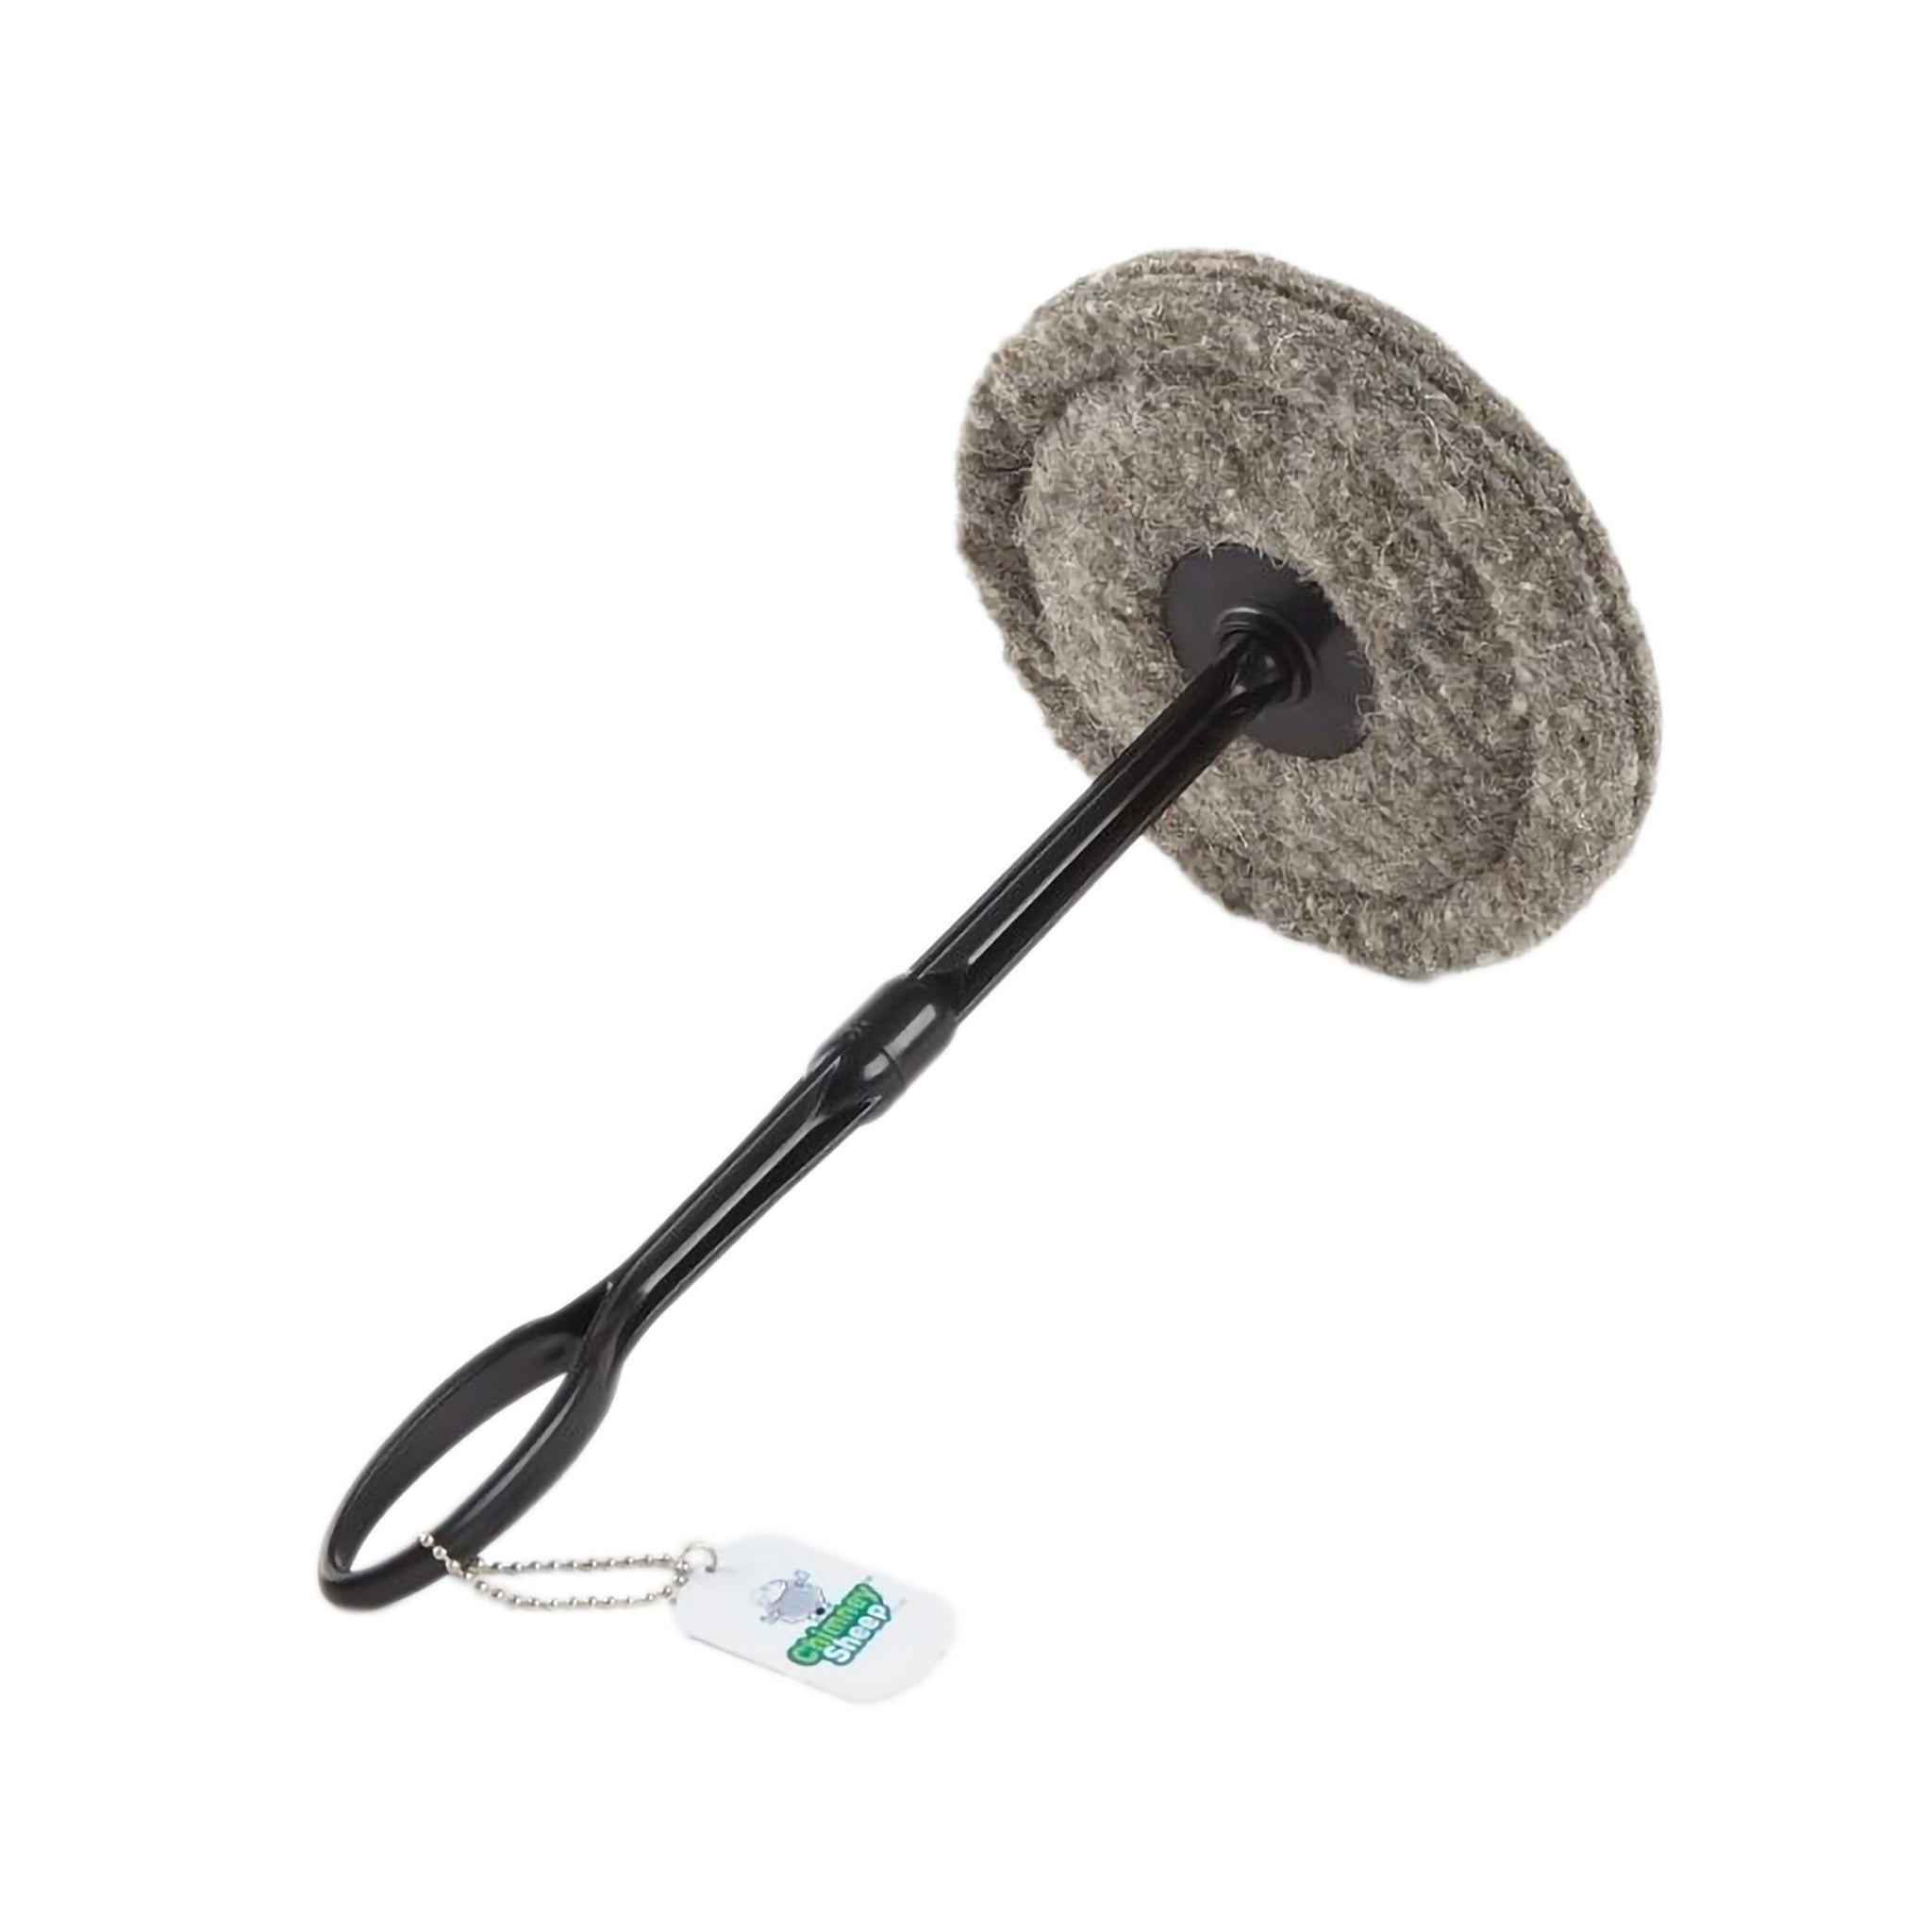 Chimney Sheep draught excluder with extension rod and handle attached.